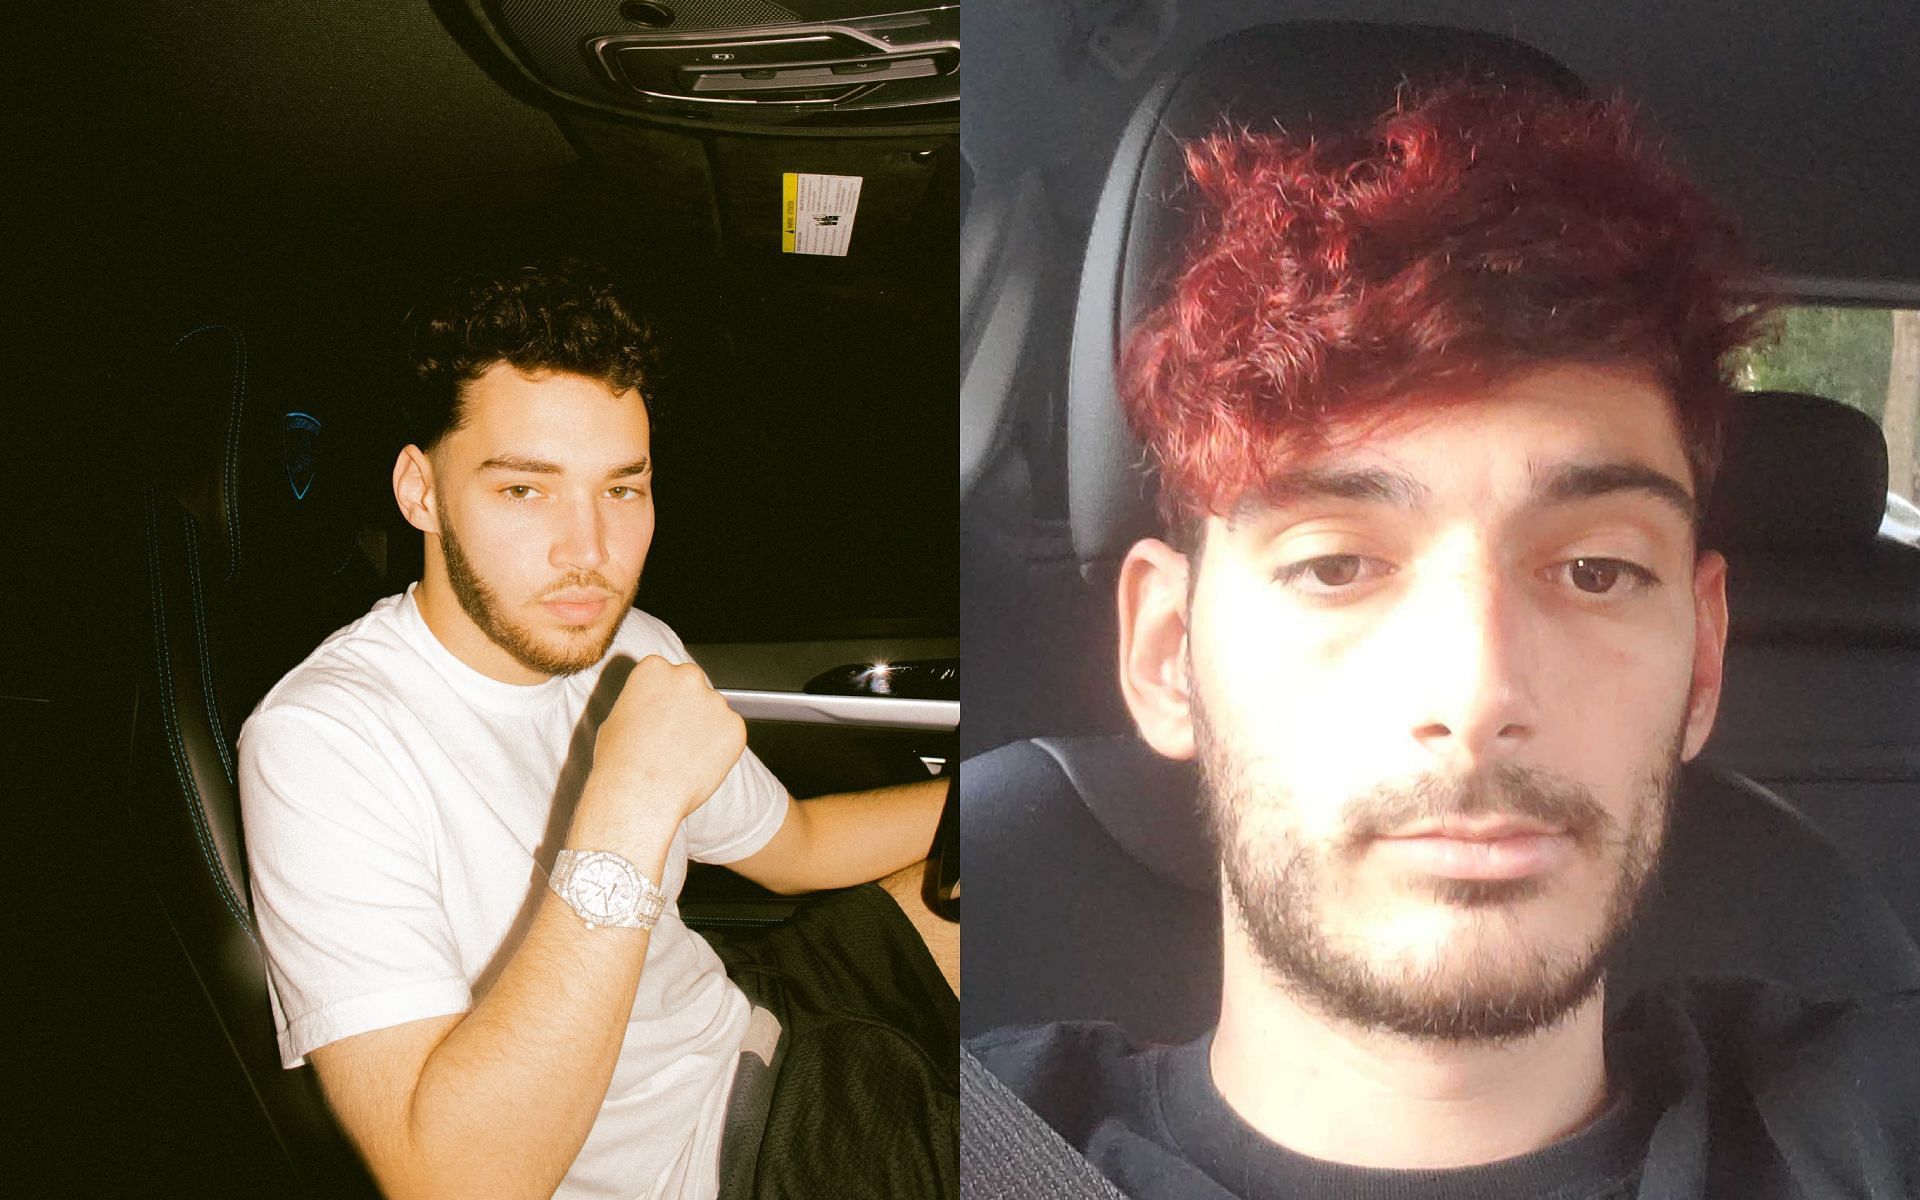 Adin Ross and Ice Poseidon talk about their potential IRL stream in India (Images via Adin Ross and Ice Poseidon/Twitter)